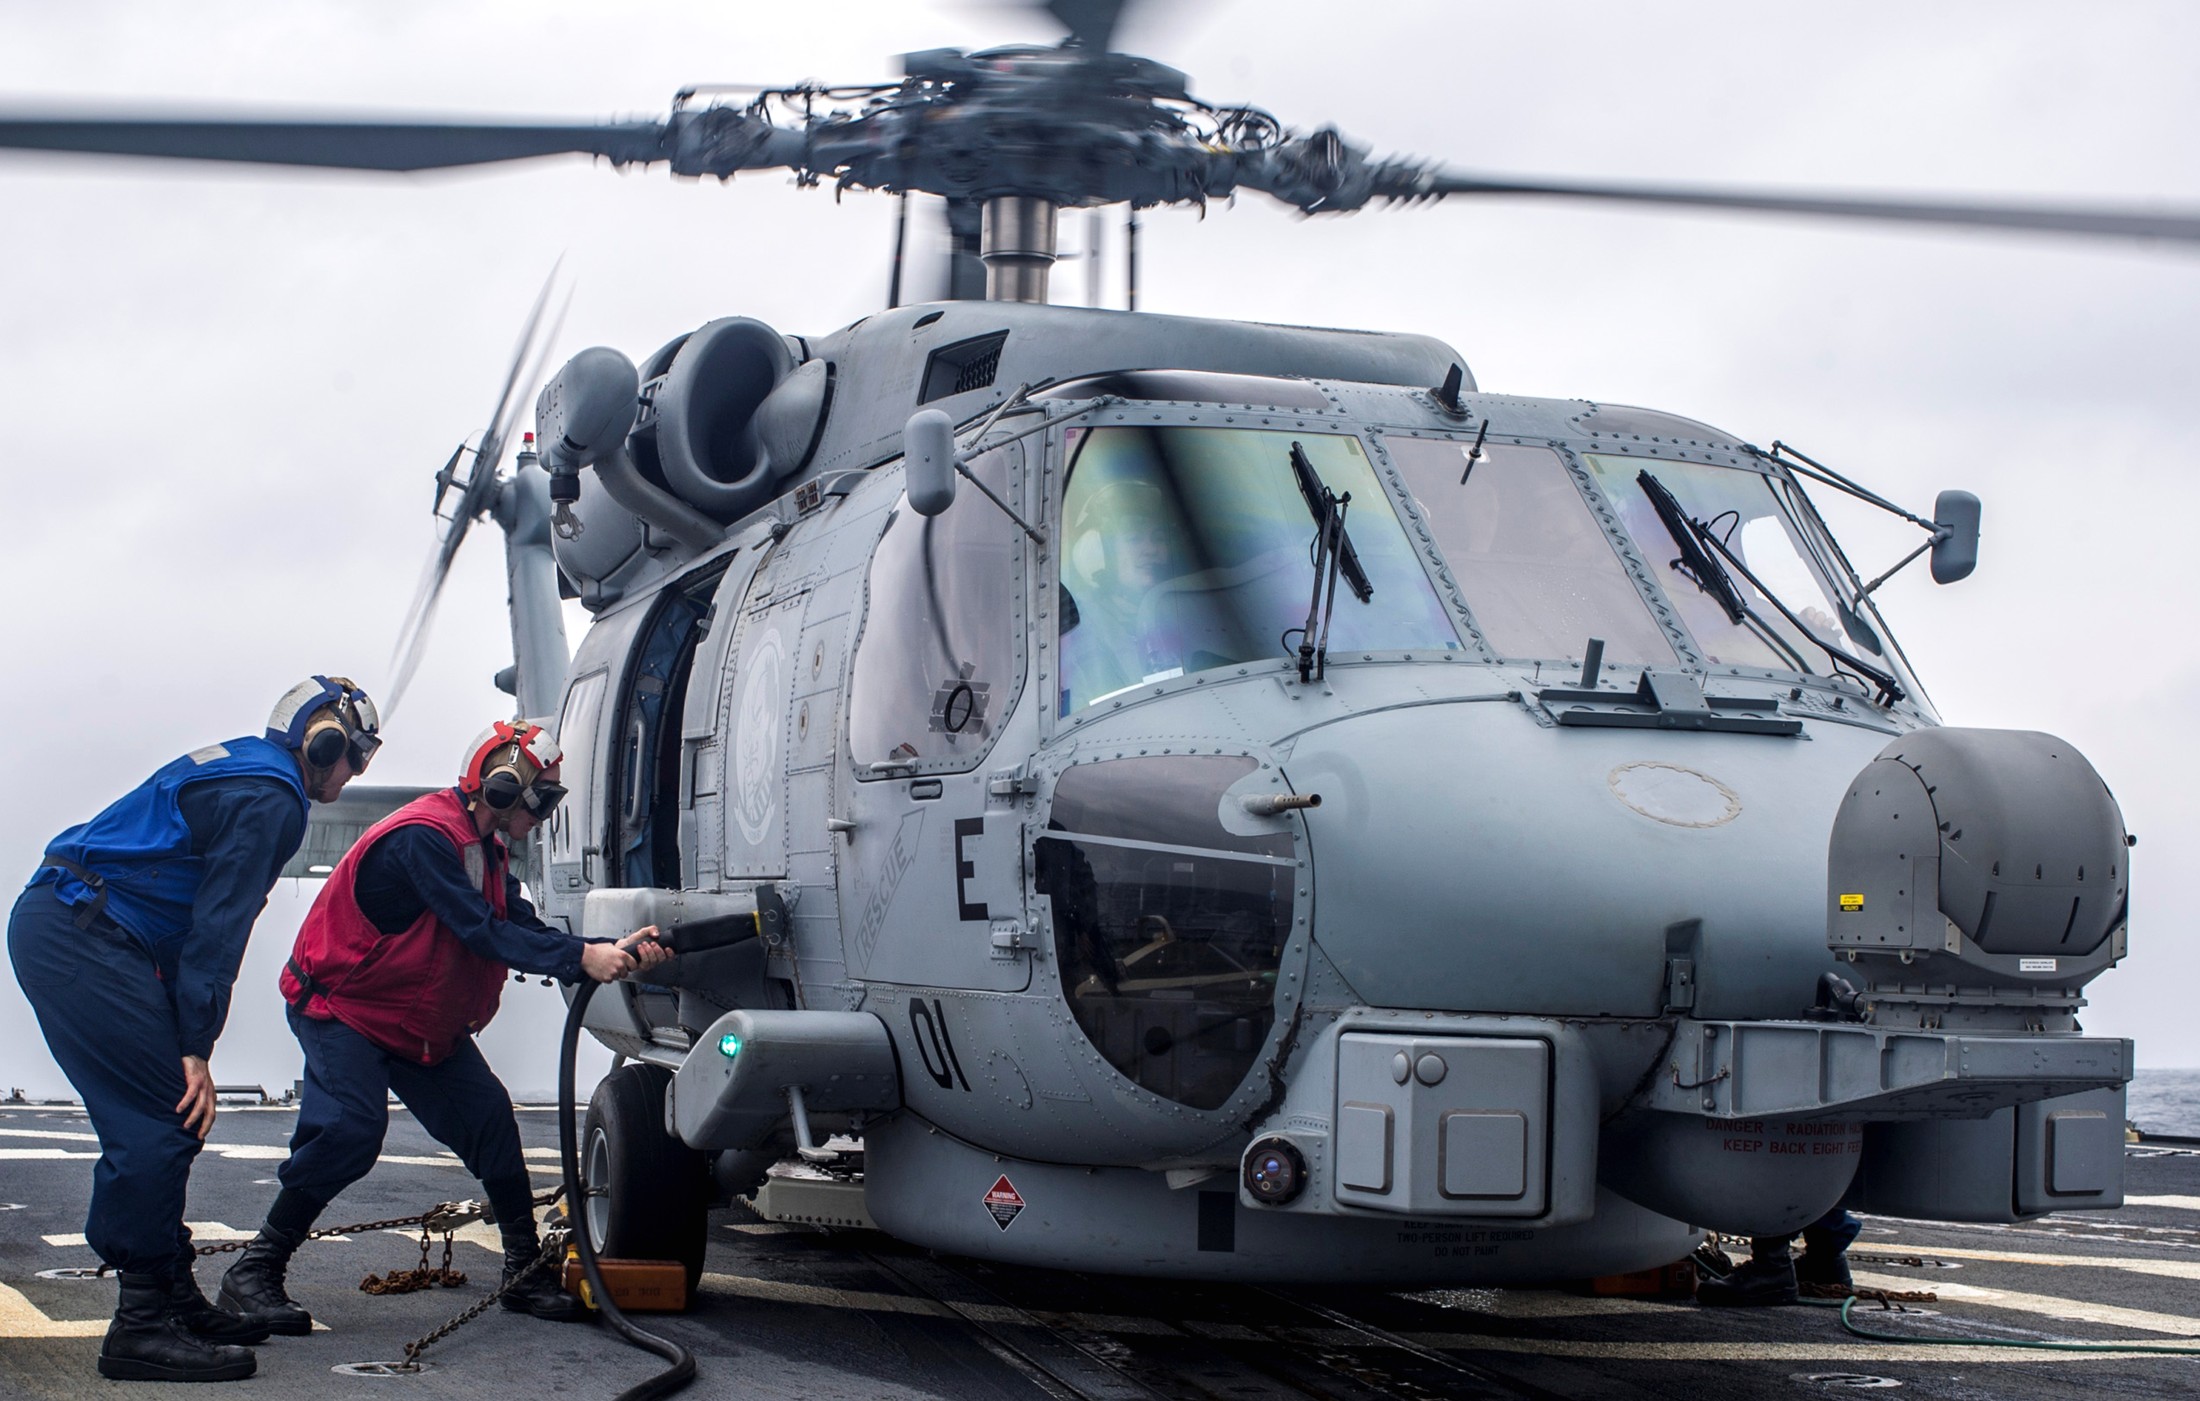 hsm-51 warlords helicopter maritime strike squadron mh-60r seahawk navy 2014 23